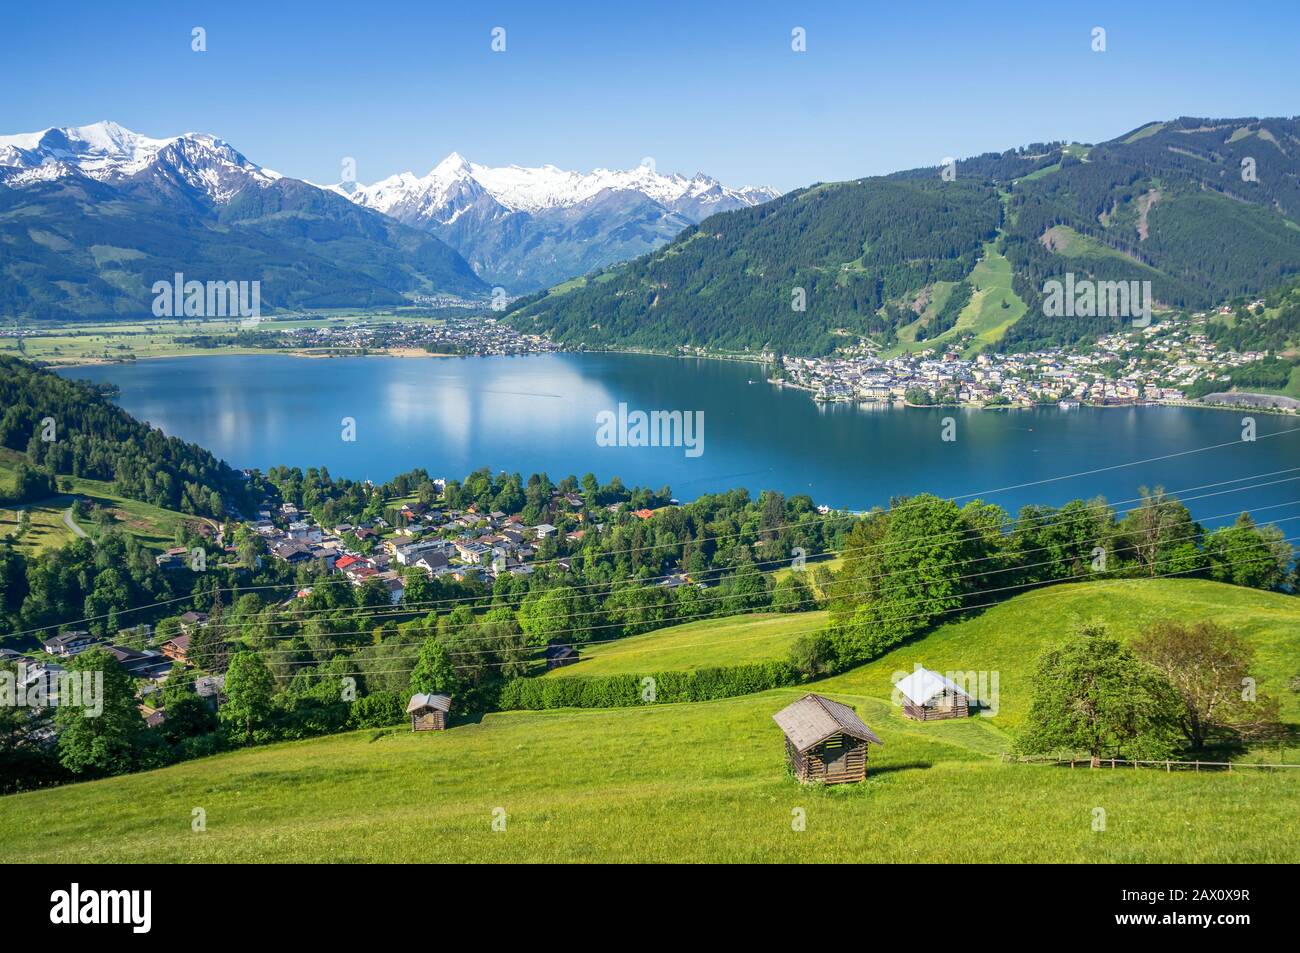 Panoramic view of beautiful scenery in the Alps with mountain lake and meadows with old chalets in spring, Zell am See, Salzburger Land, Austria Stock Photo